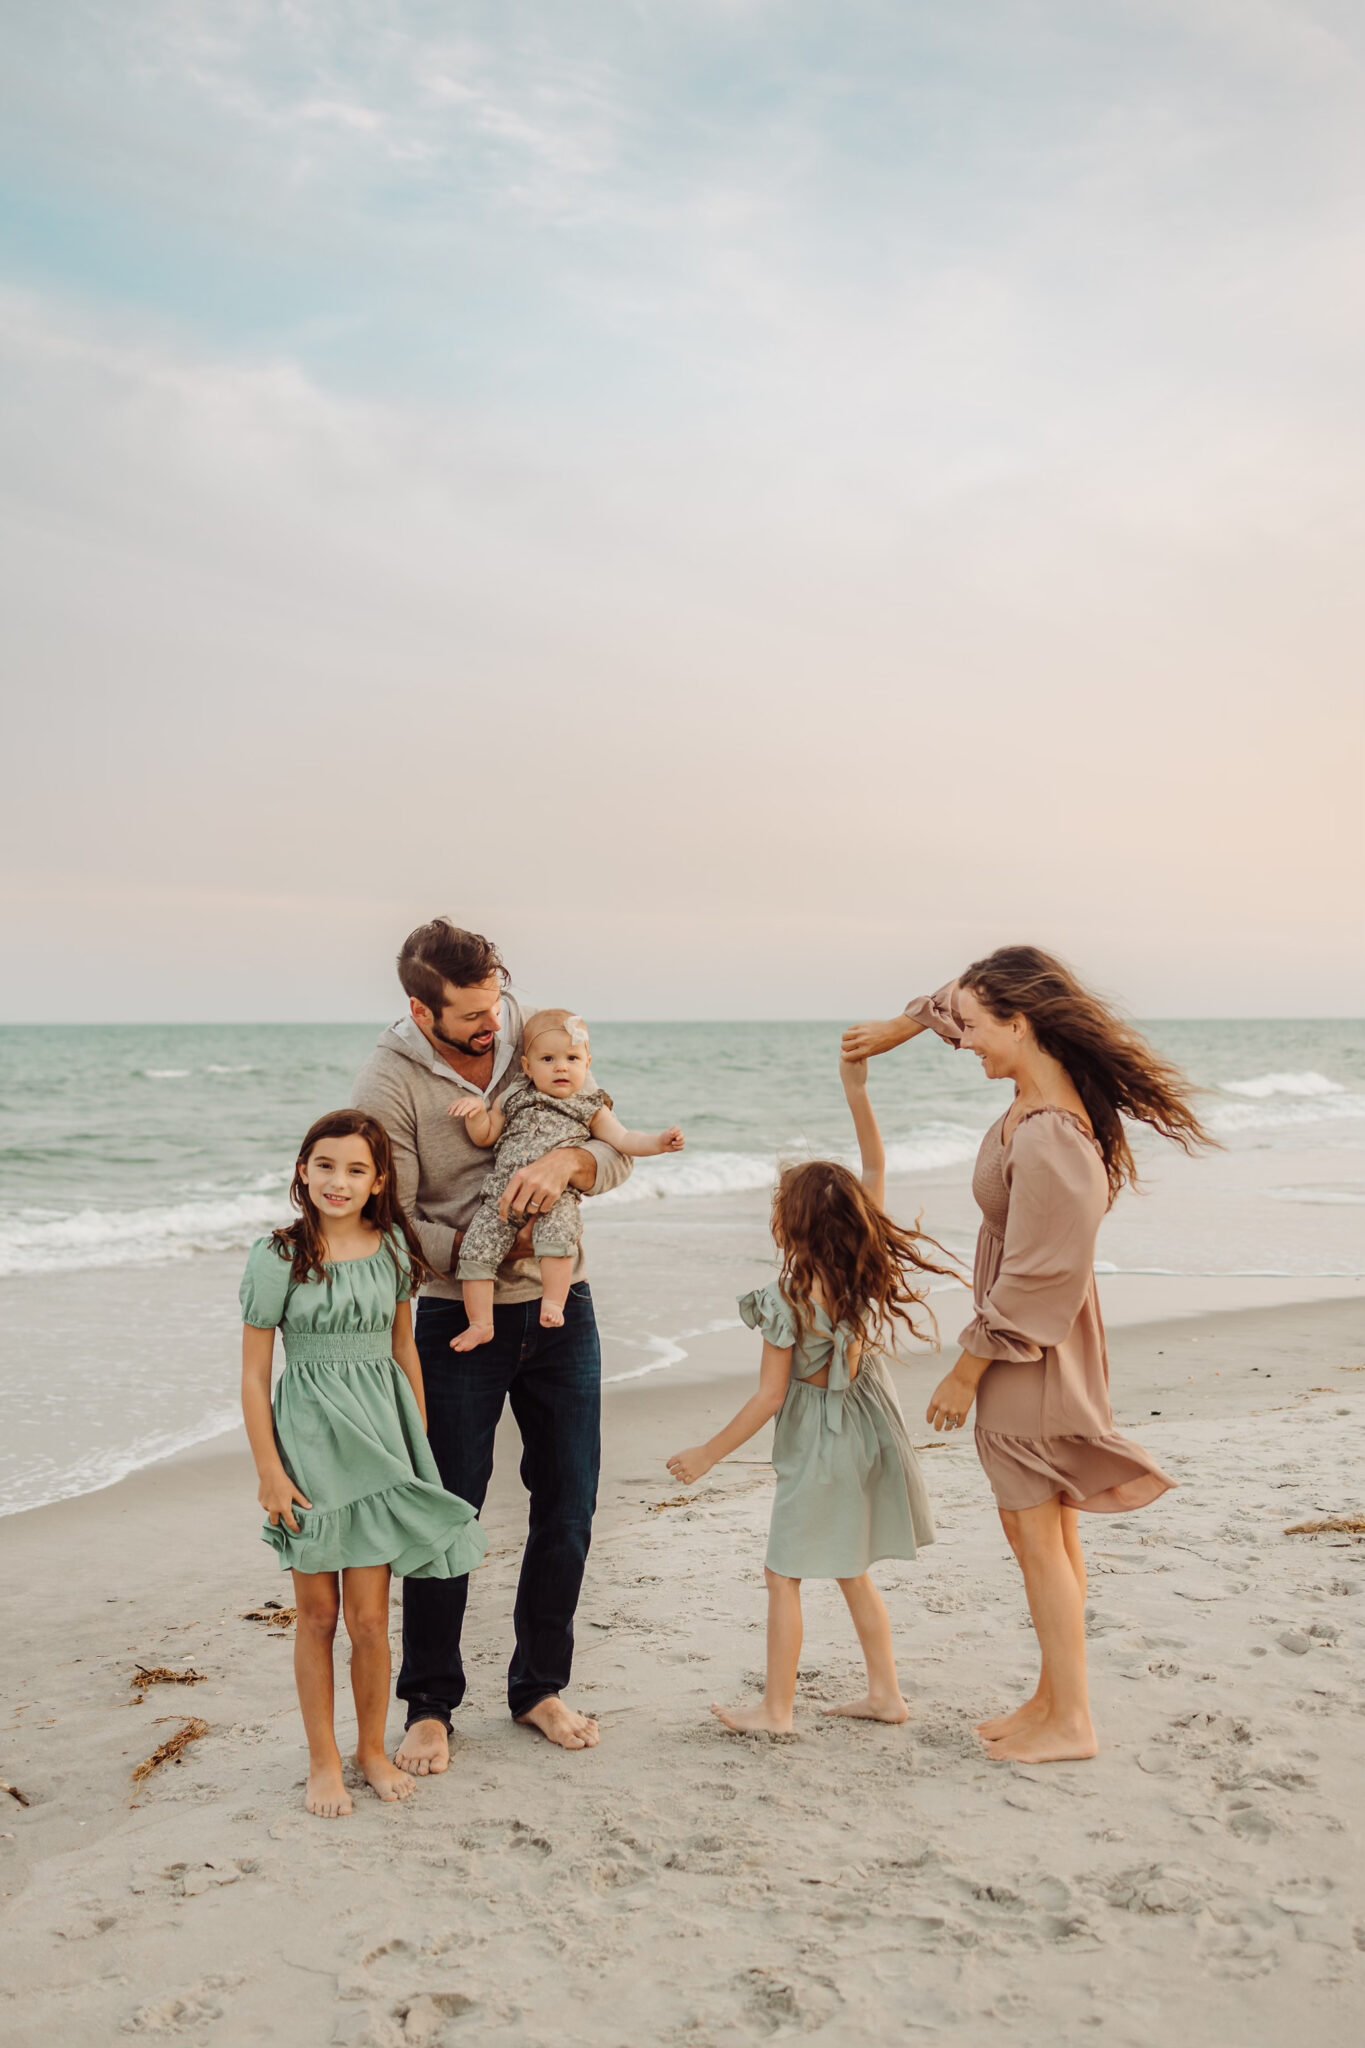 Fall family photo on beach green and tan outfits